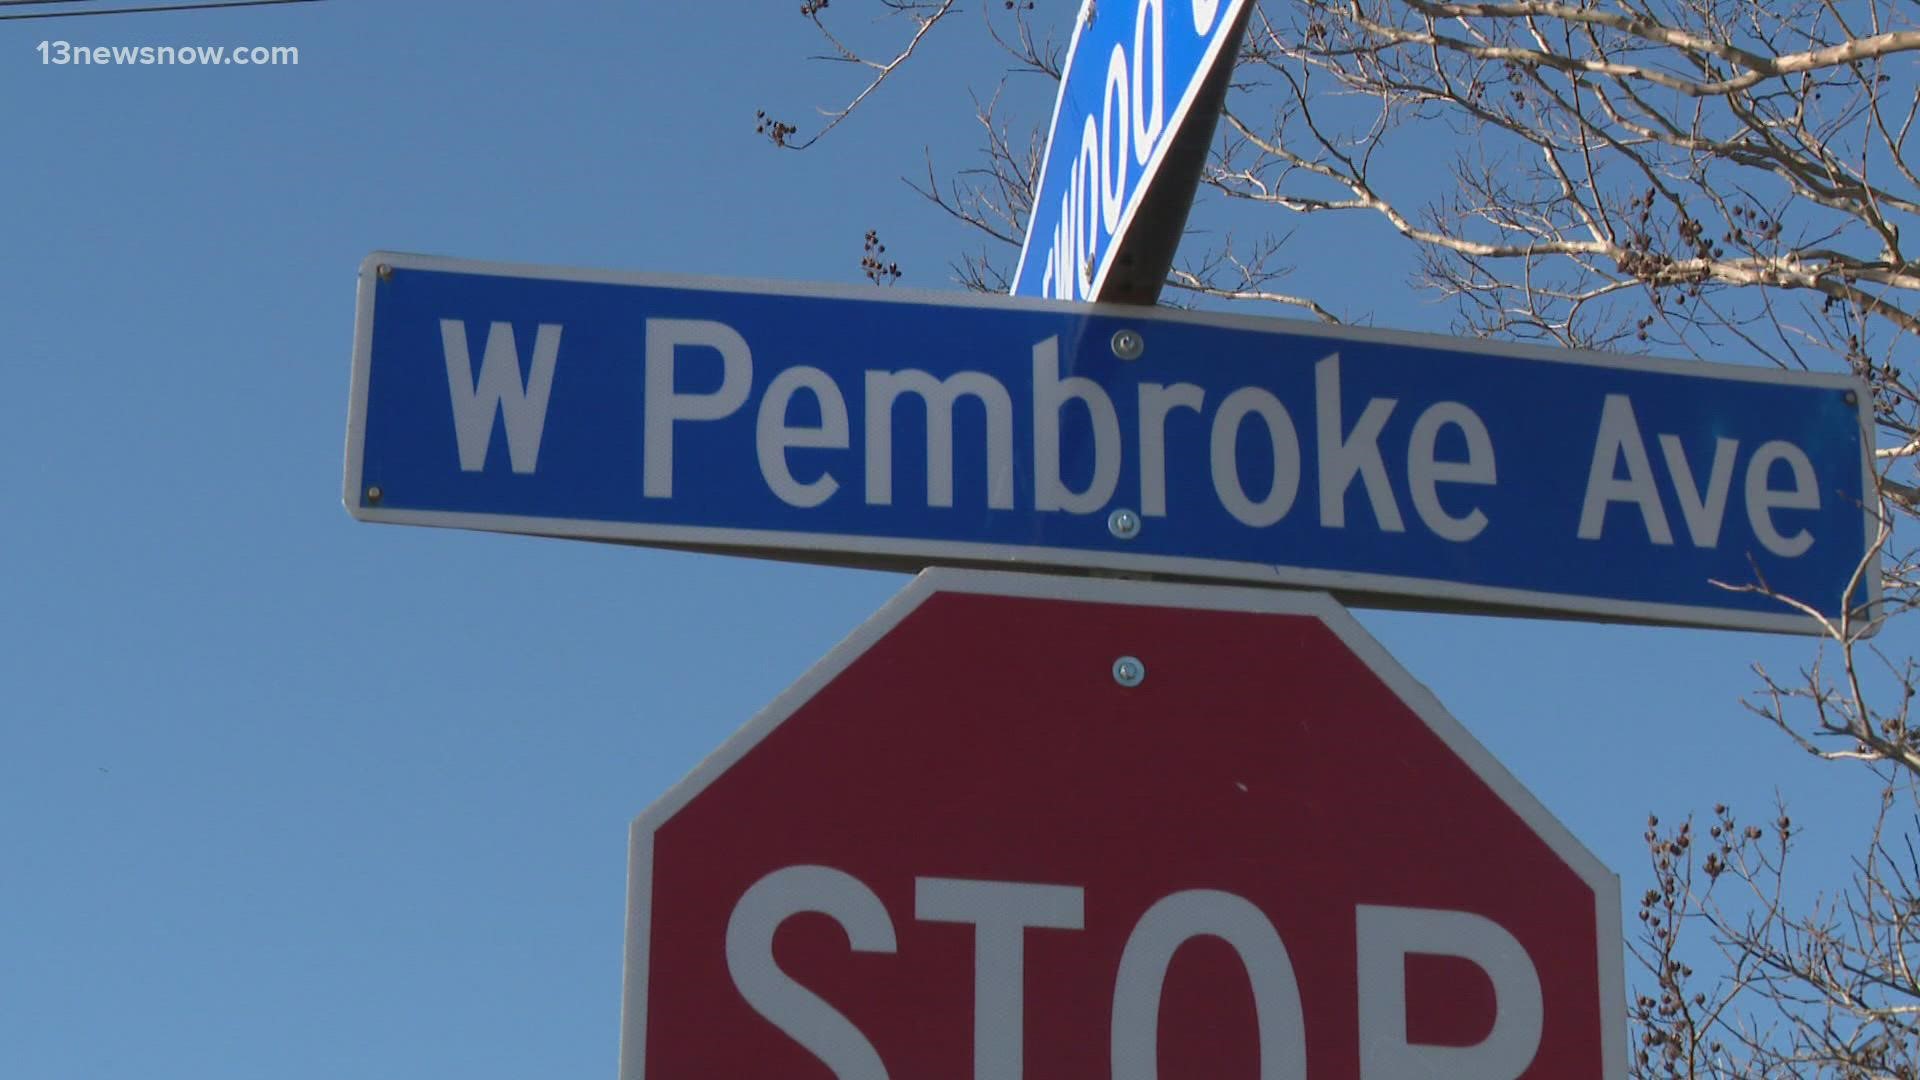 According to a release, police received a call that there was a man who had been shot to death in an apartment on the 1600 block of West Pembroke Avenue.